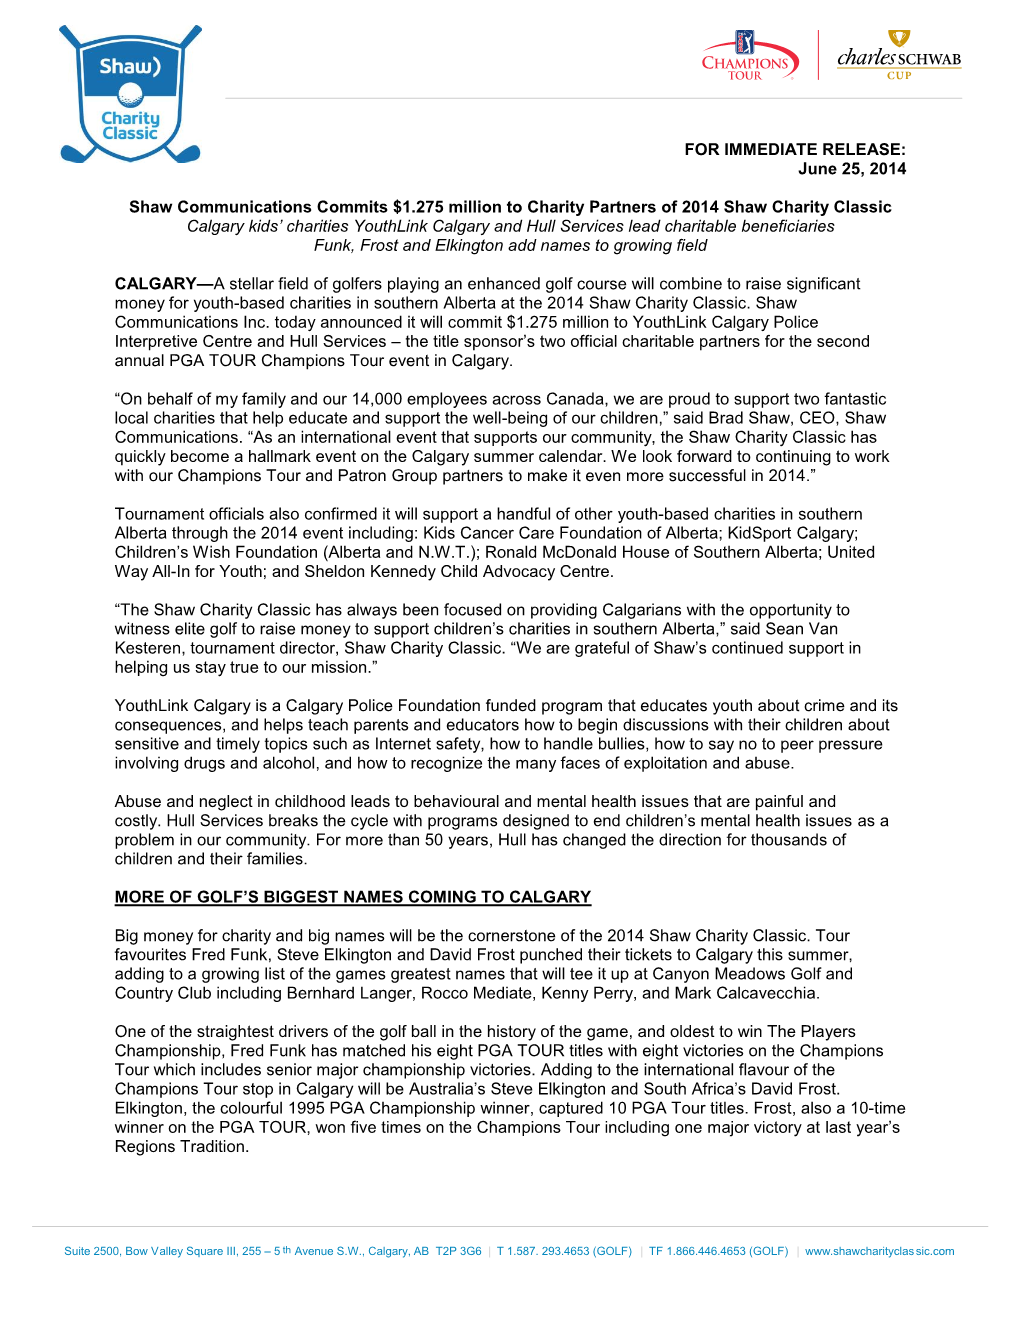 FOR IMMEDIATE RELEASE: June 25, 2014 Shaw Communications Commits $1.275 Million to Charity Partners of 2014 Shaw Charity Classic